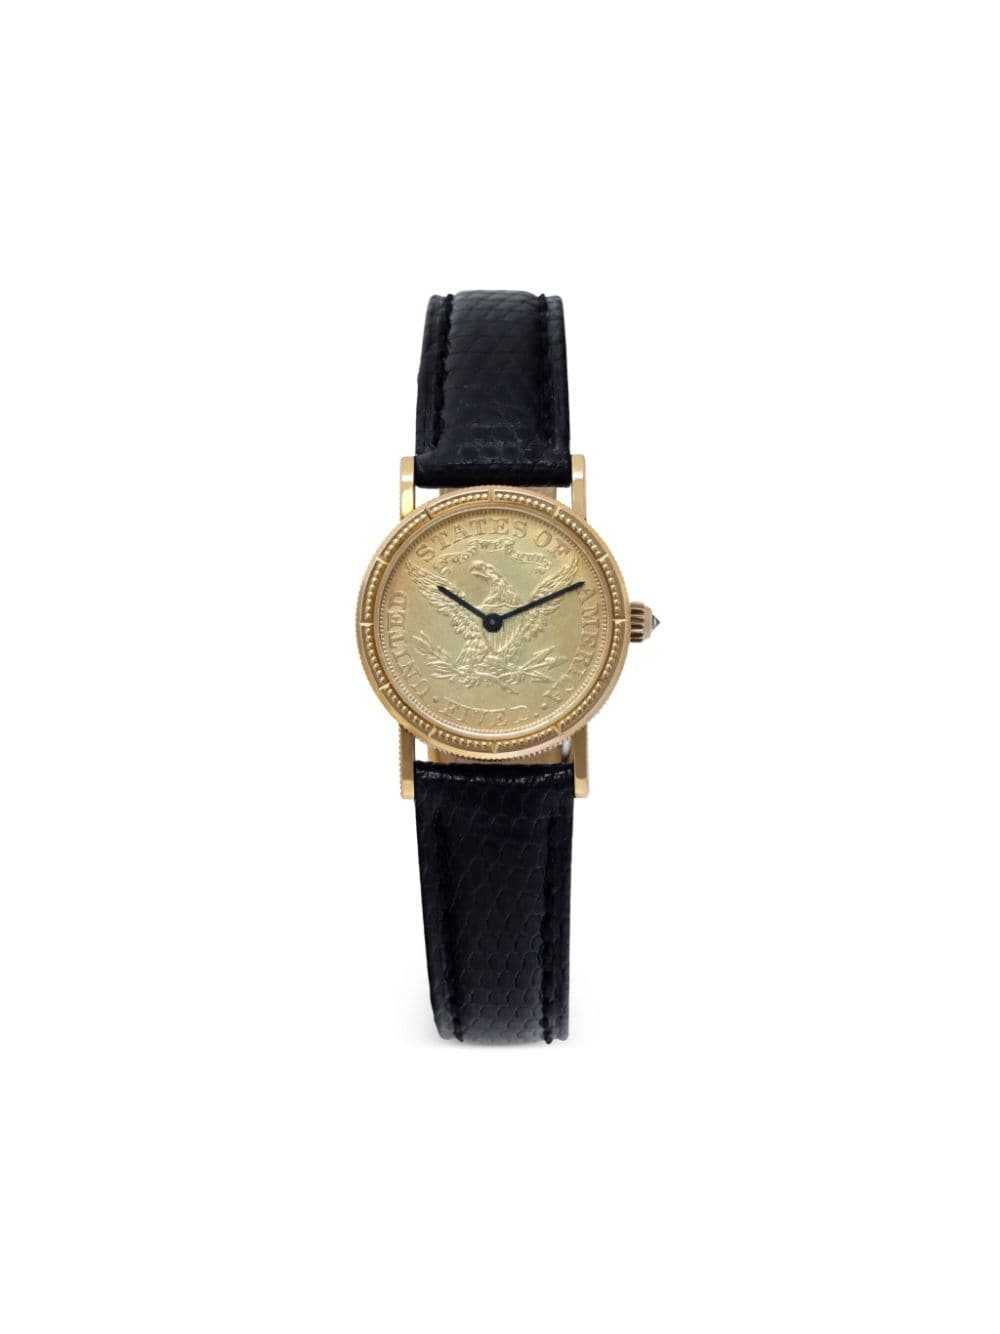 Corum pre-owned 1990s $5 Coin 24mm - Gold - image 1